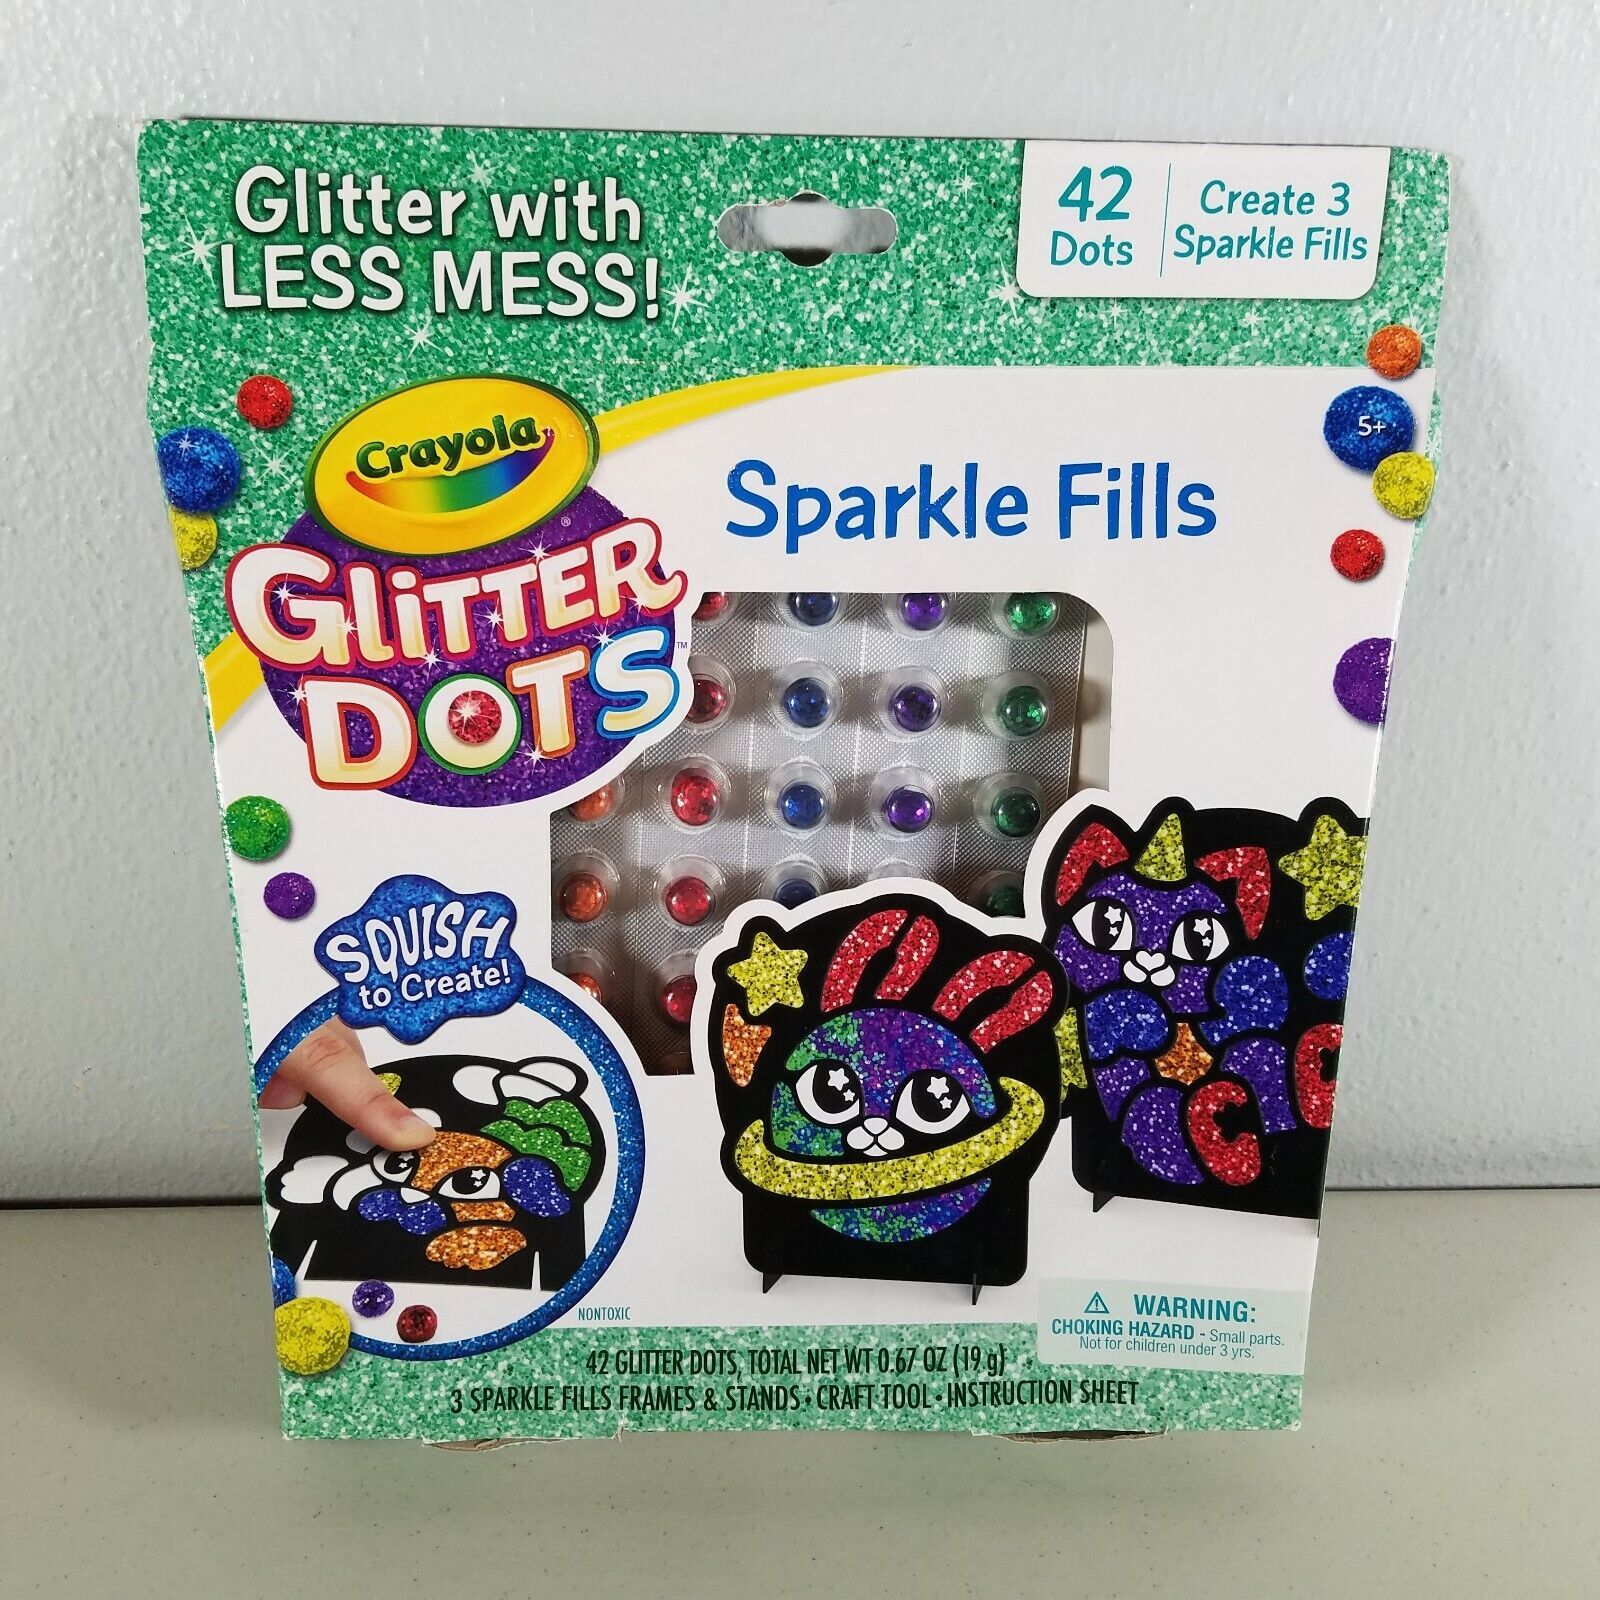 Crayola Glitter Crayon Dots Sparkle Signs Create 3 Sparkle Fills 42 Sealed New - $5.95